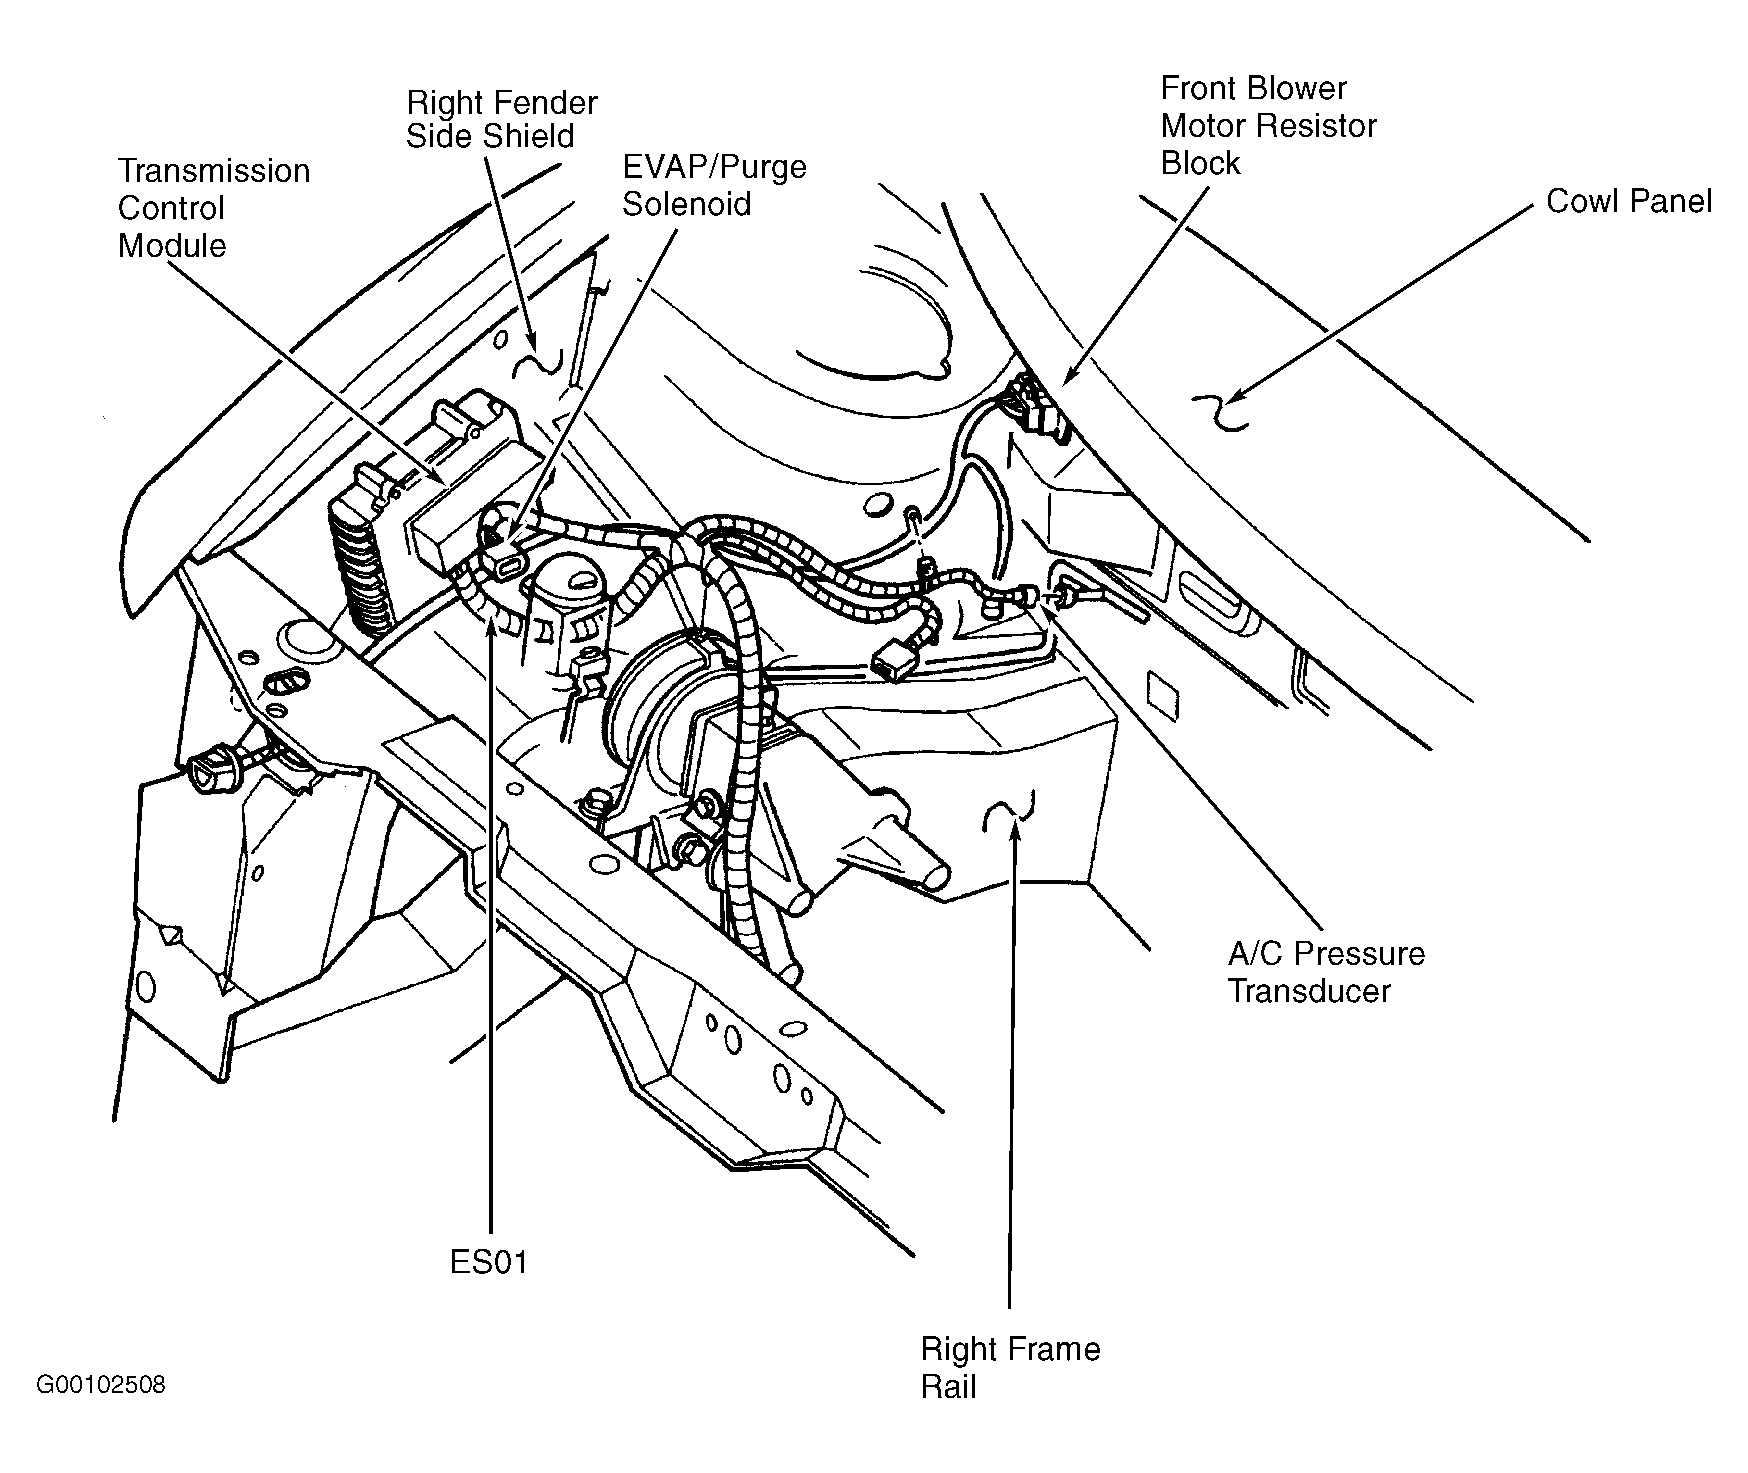 Dodge Caravan SE 2000 - Component Locations -  Right Side Of Engine Compartment